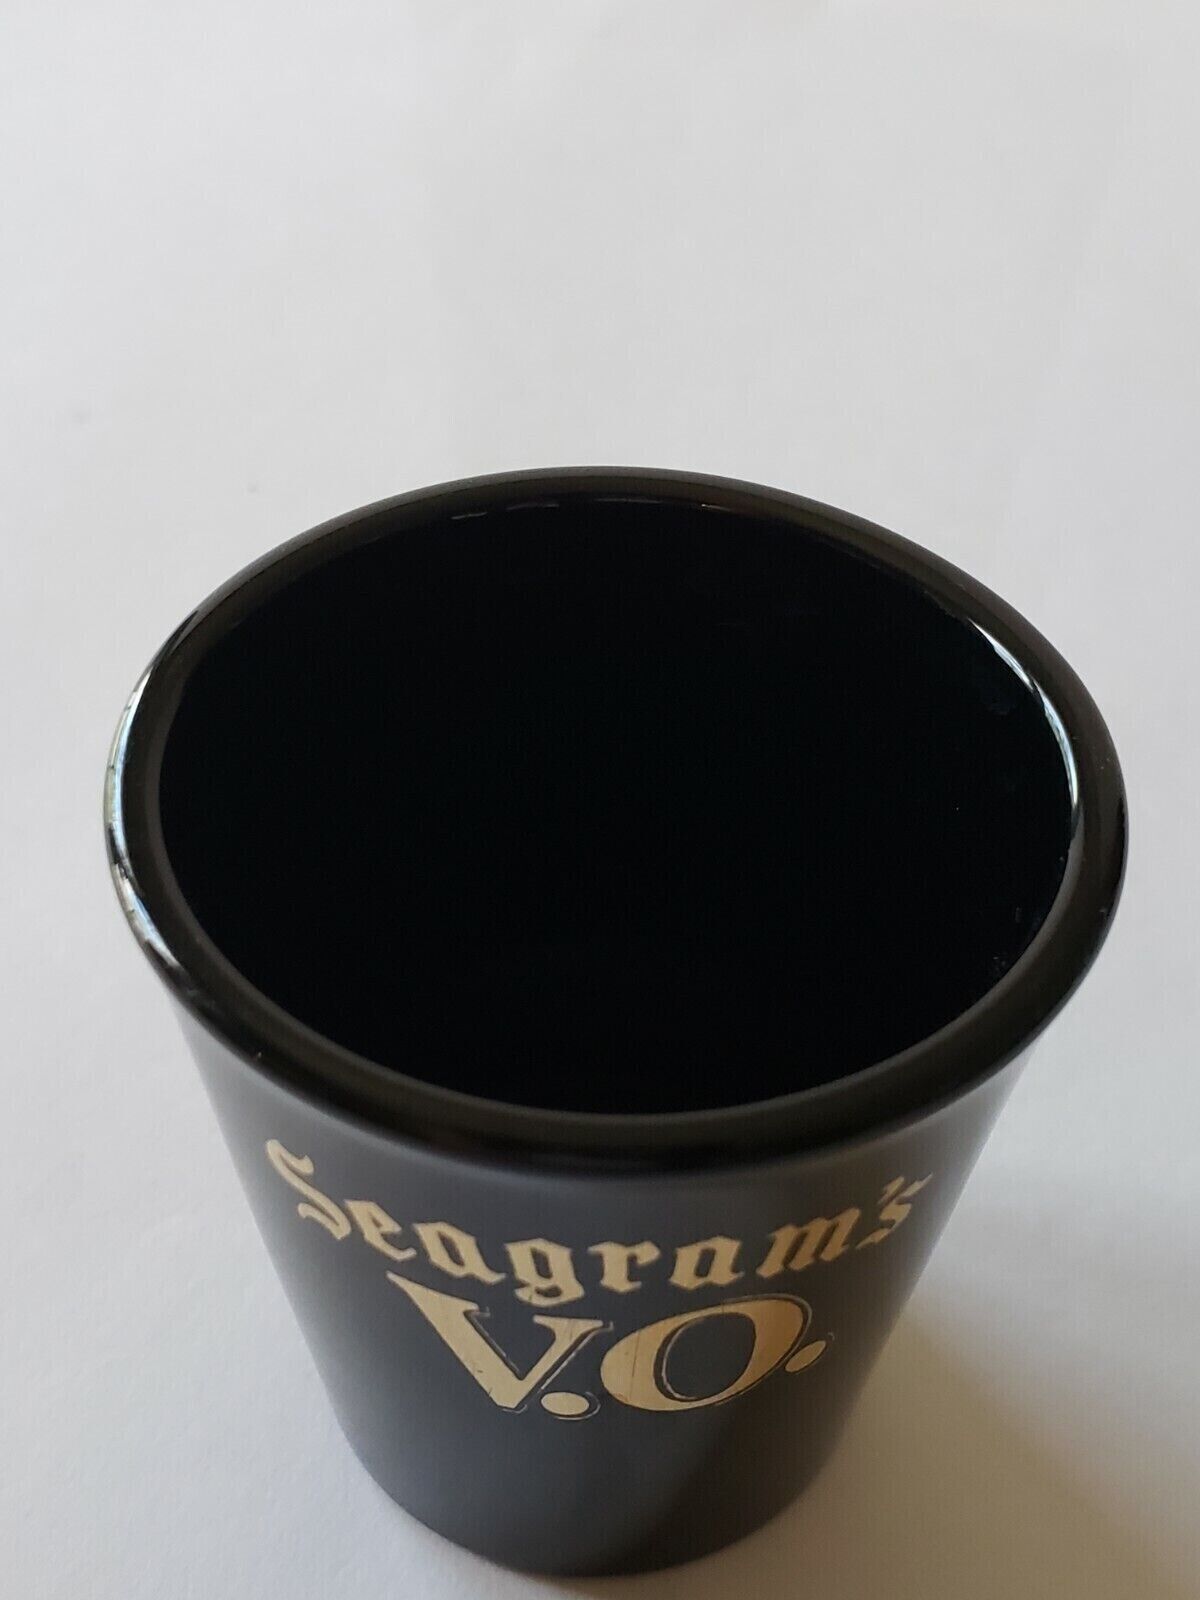 Seagrams V.O.- Black Glossy Shot Glass w/ Gold Letters- excellent